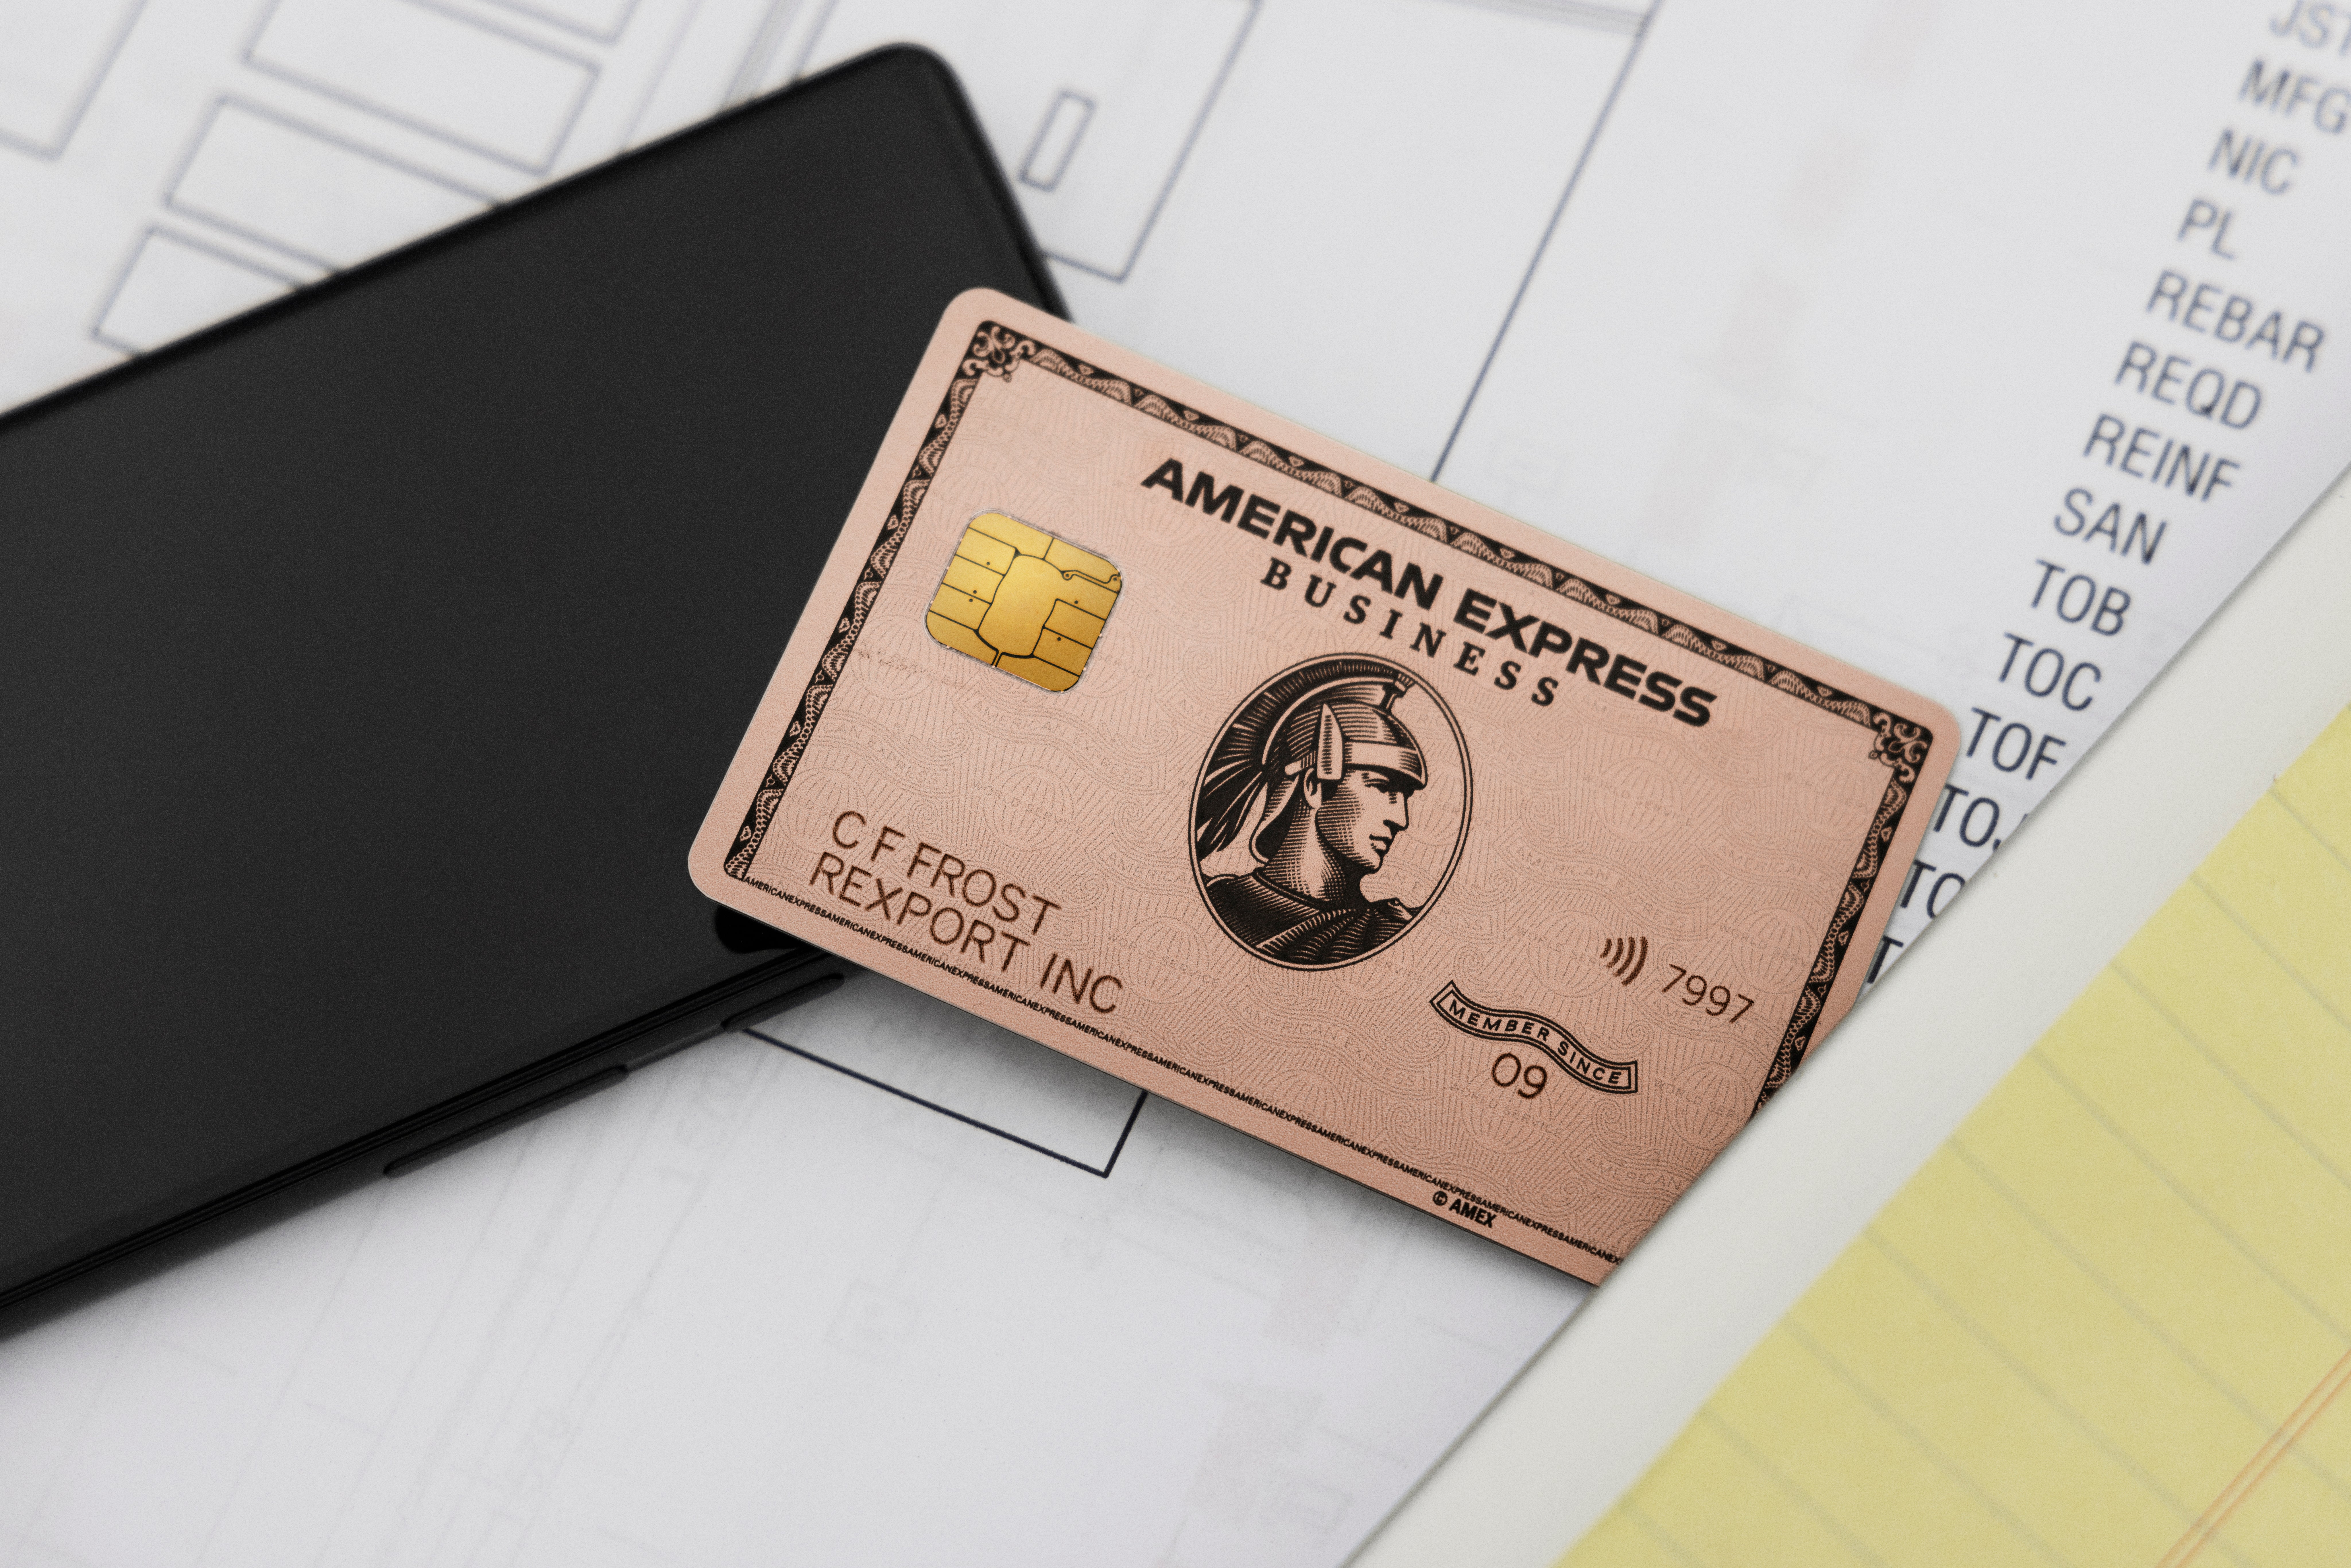 Amex Business Rose Gold Card on top of paperwork